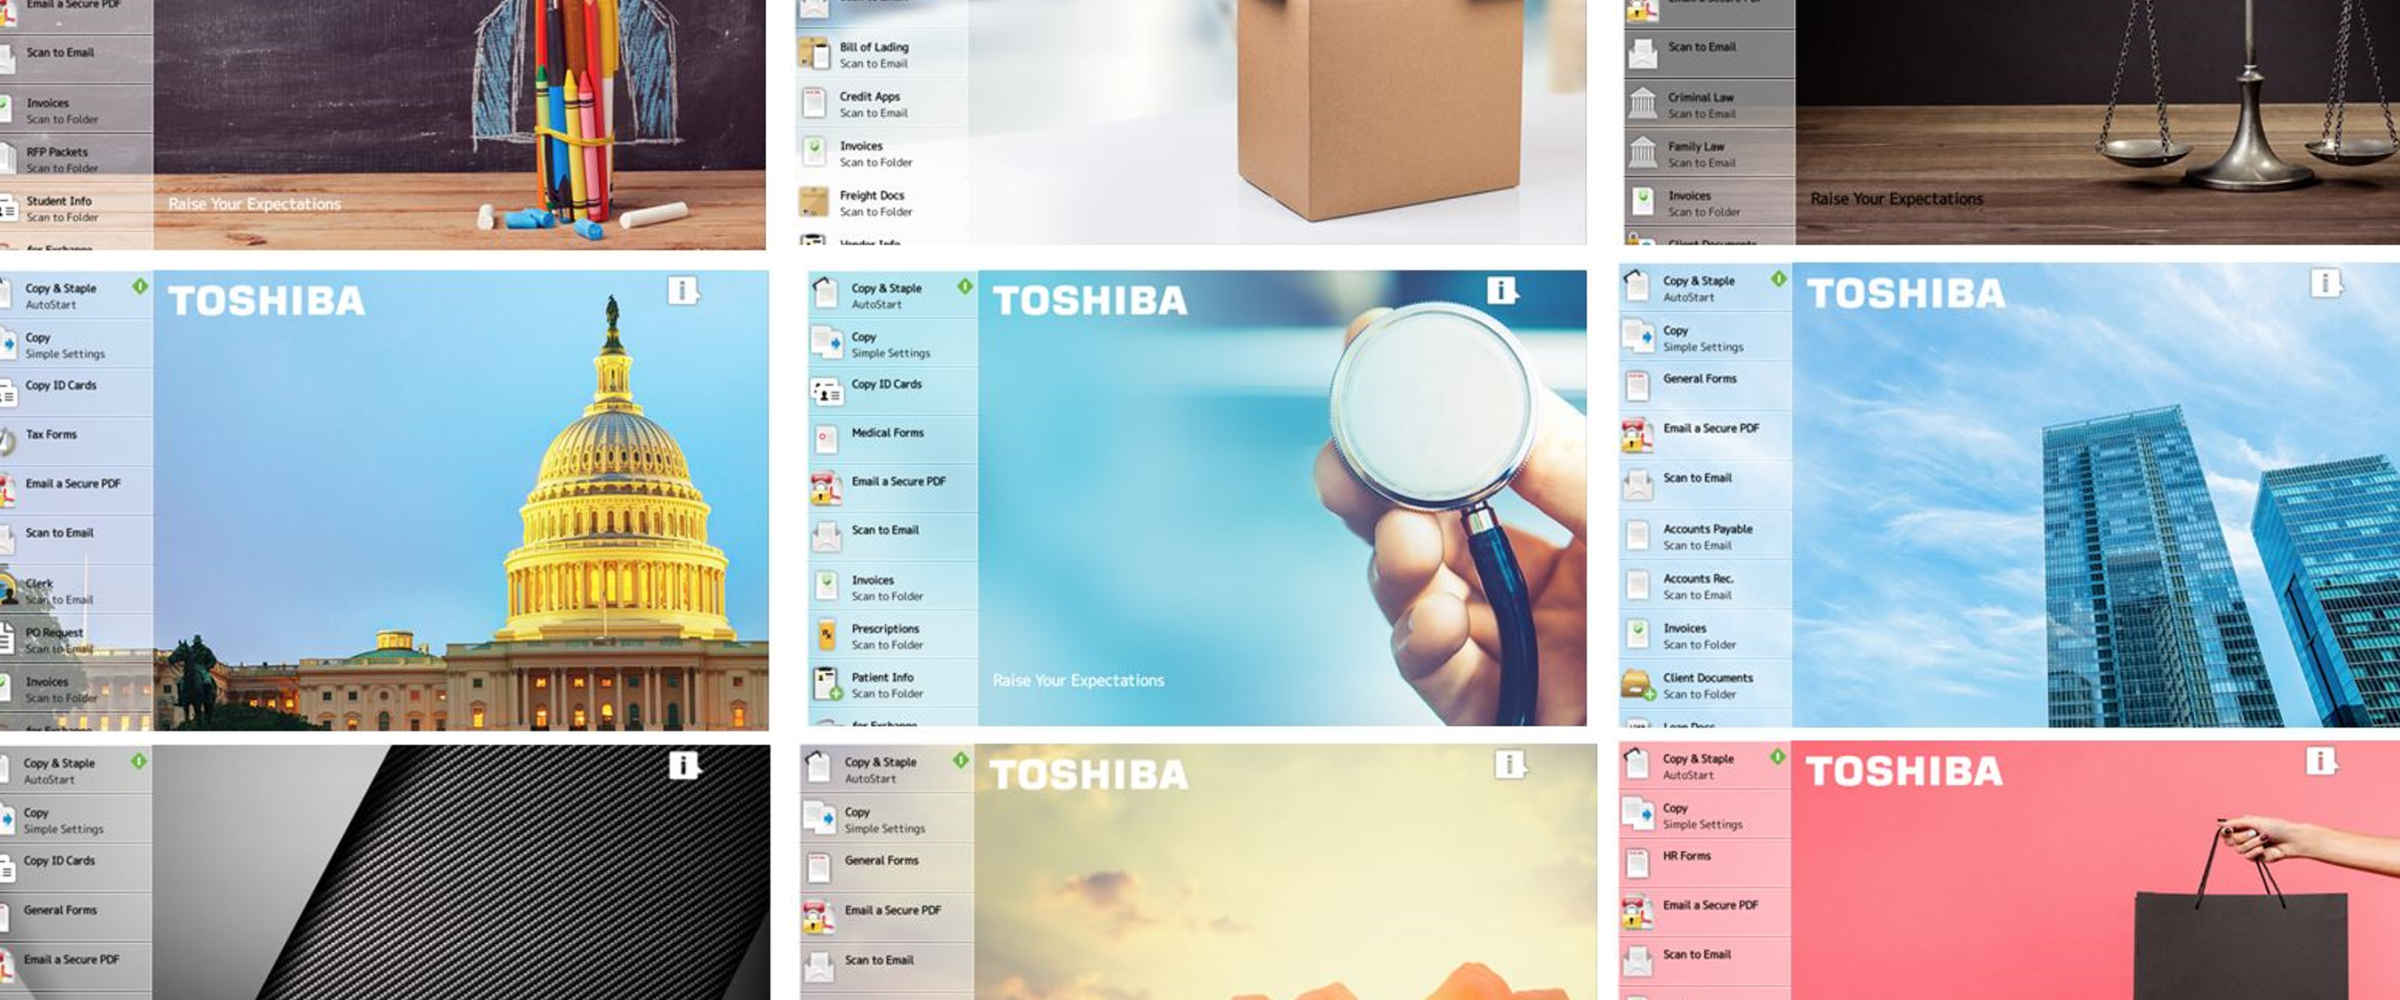 Toshiba's Personalized User Interface